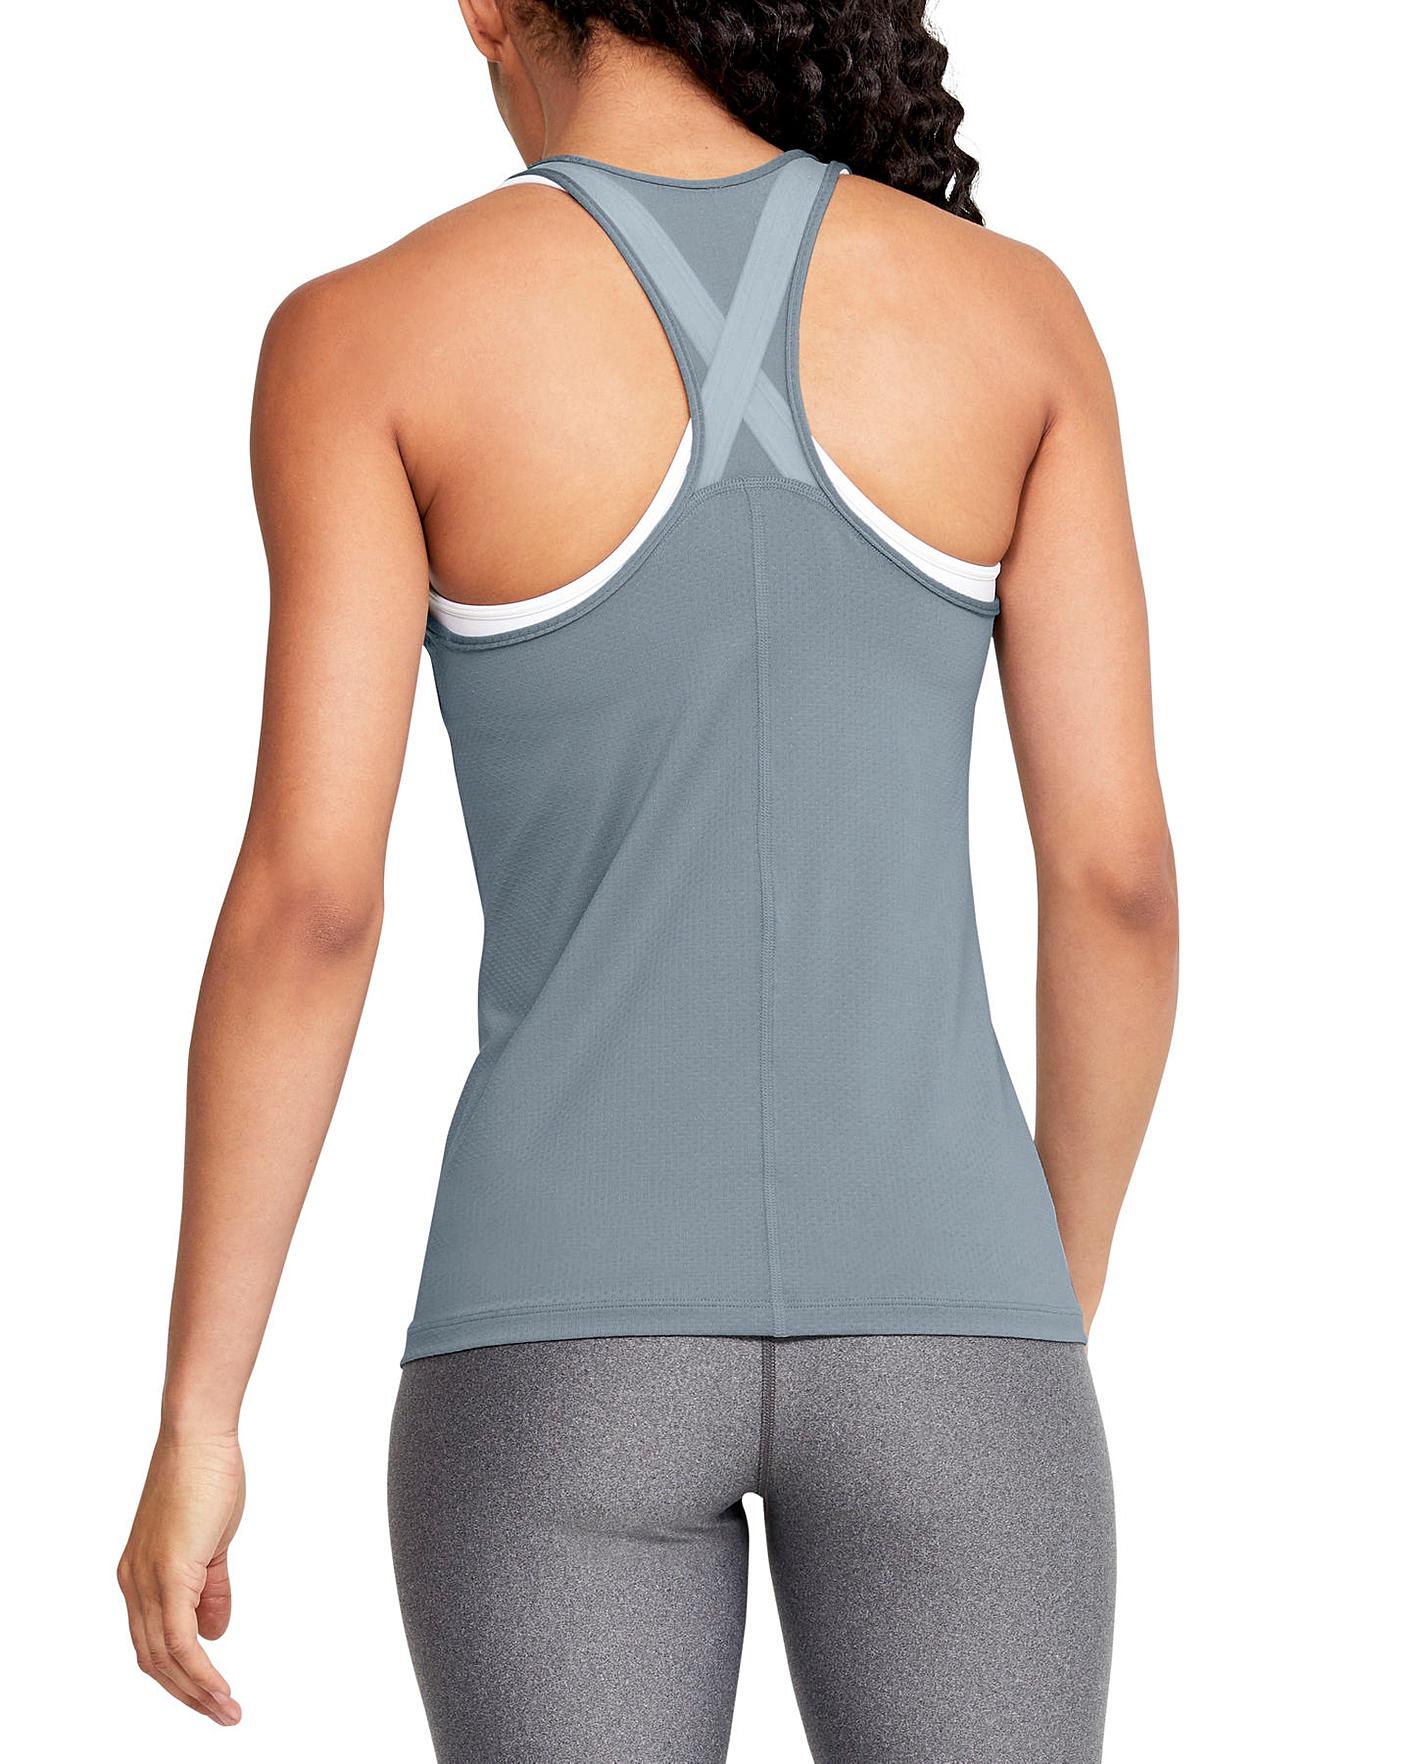 HeatGear® Armour is our original performance baselayer—the layer you put on  first and take off last. It's tight to wick away sweat and quick-drying to  keep you cool. No athlete can go